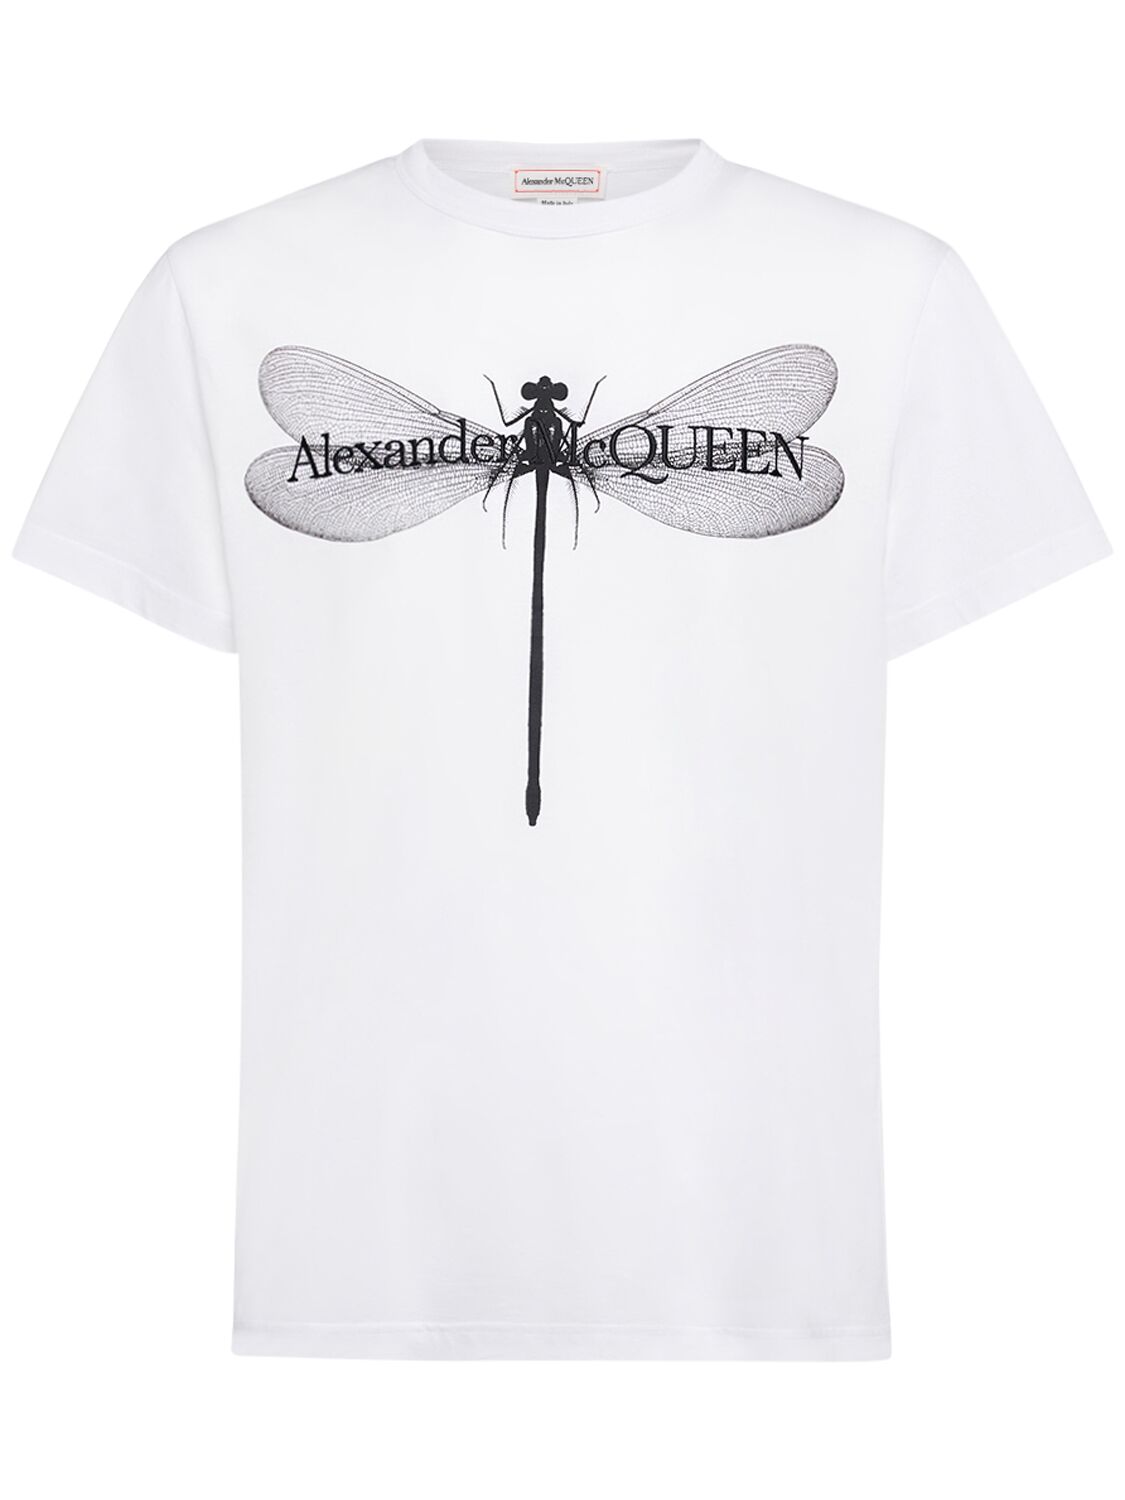 Image of Dragonfly Printed Cotton T-shirt